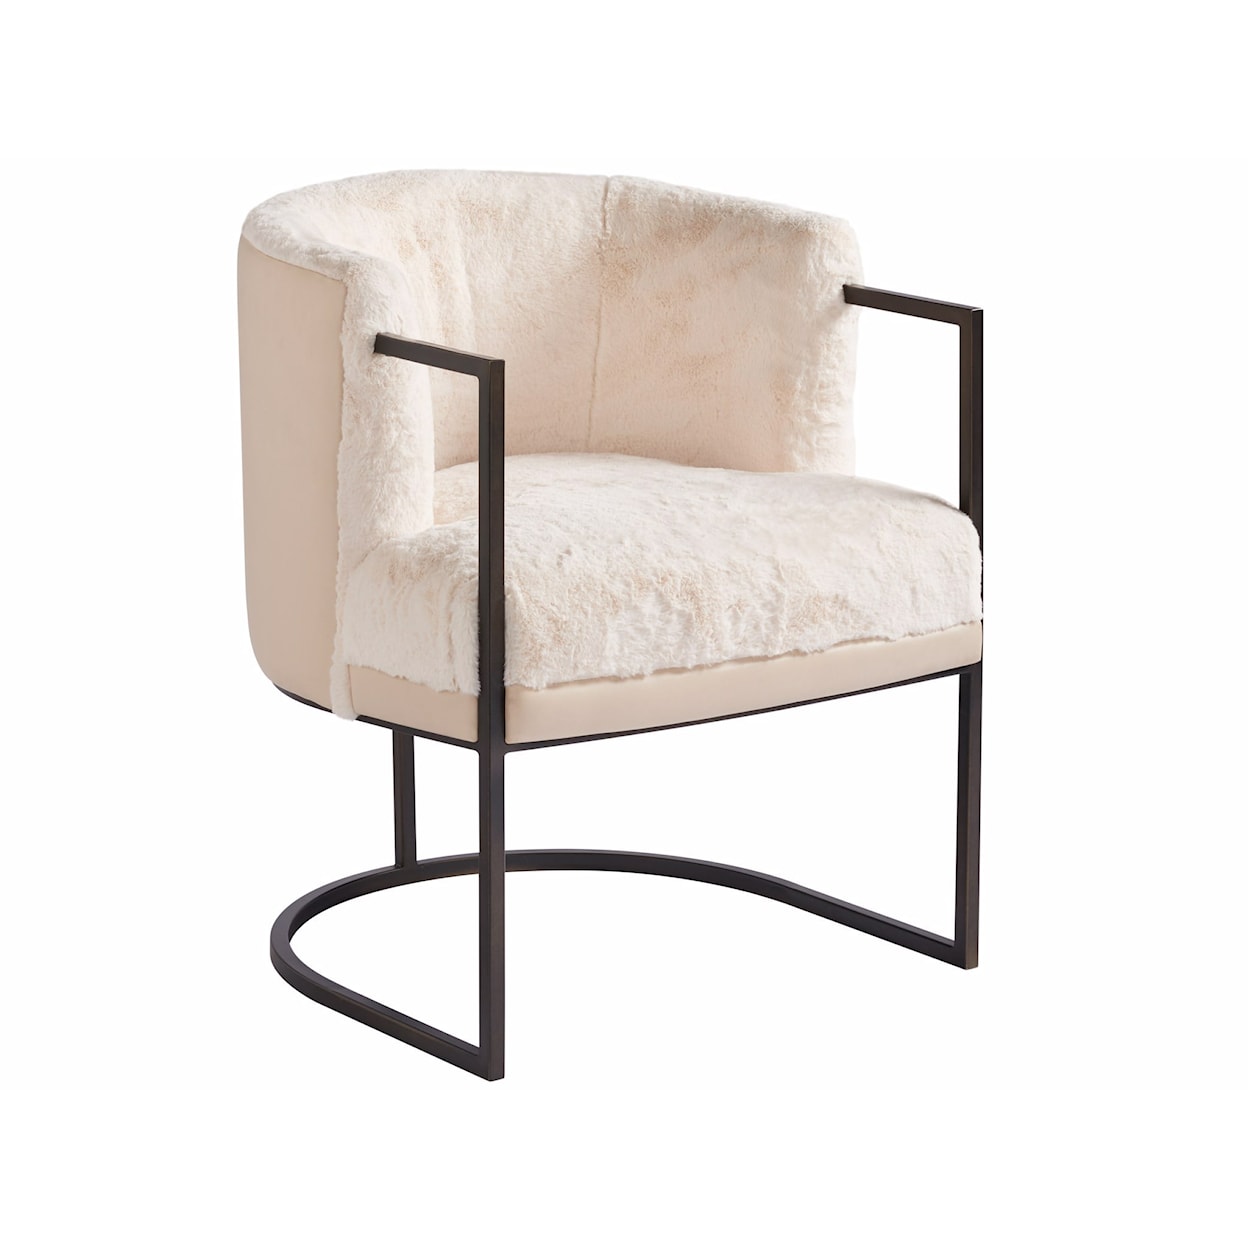 Universal Accents Alpine Valley Accent Chair